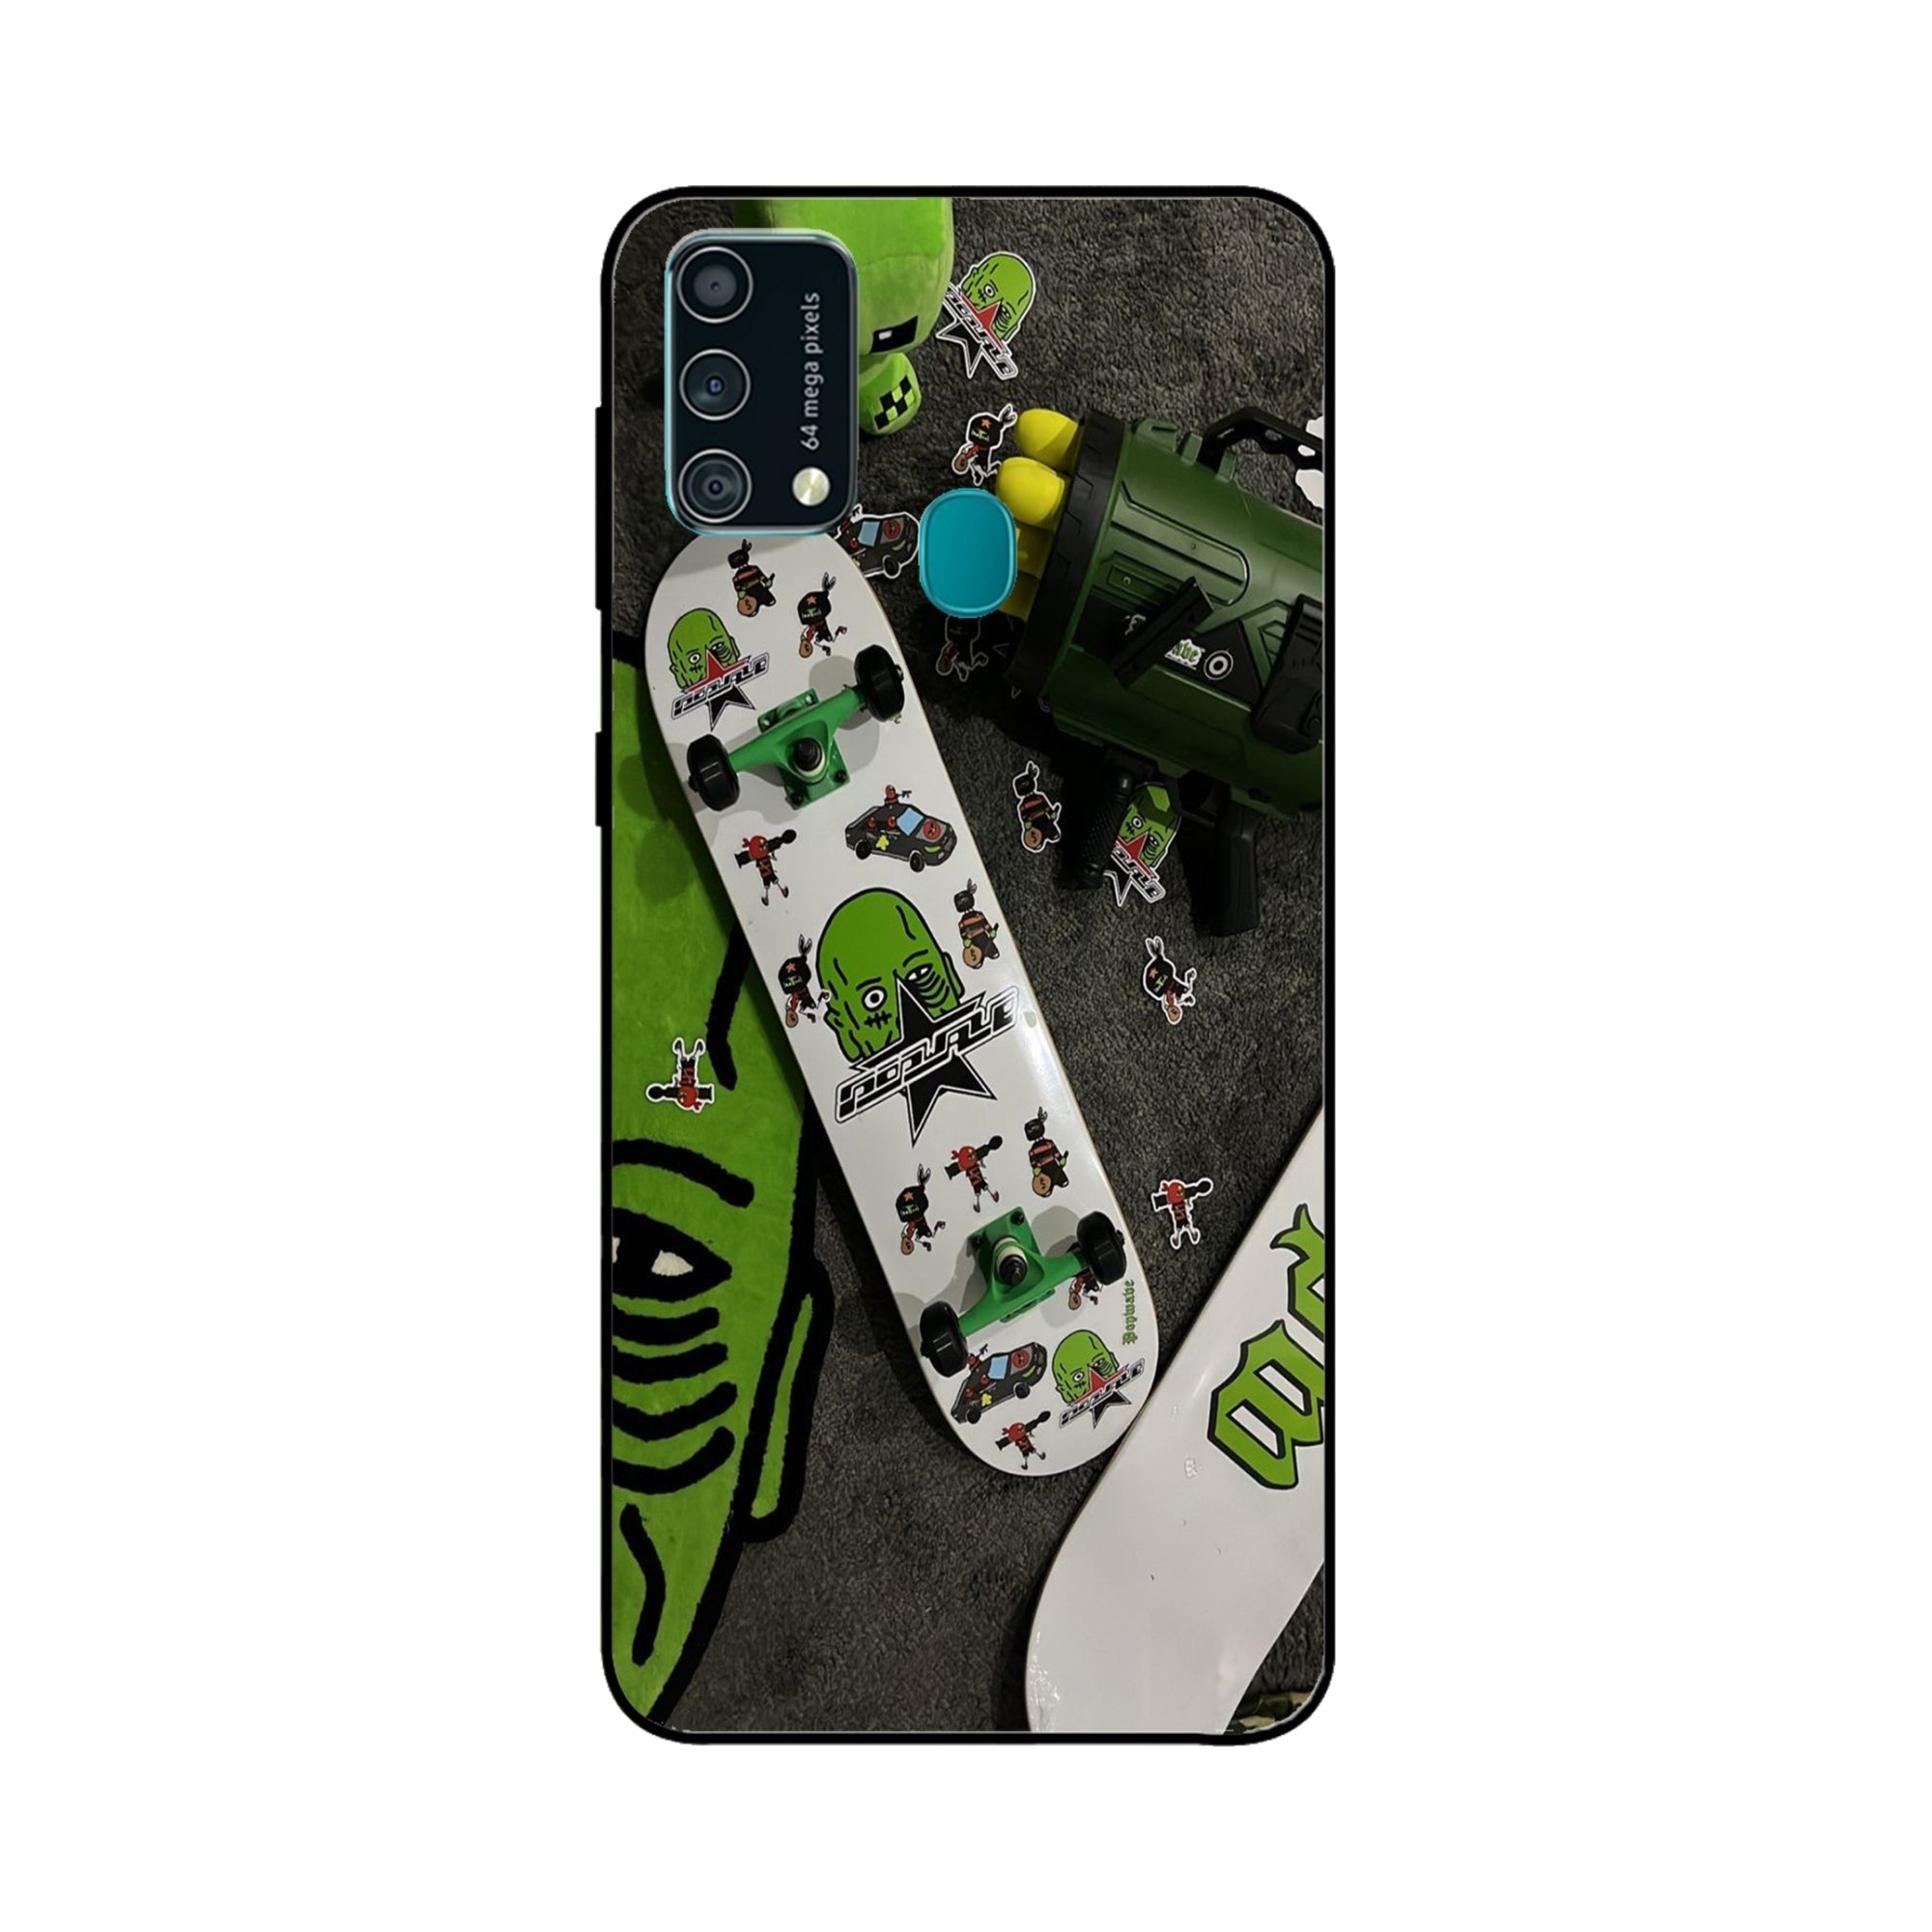 Buy Hulk Skateboard Metal-Silicon Back Mobile Phone Case/Cover For Samsung Galaxy F41 Online